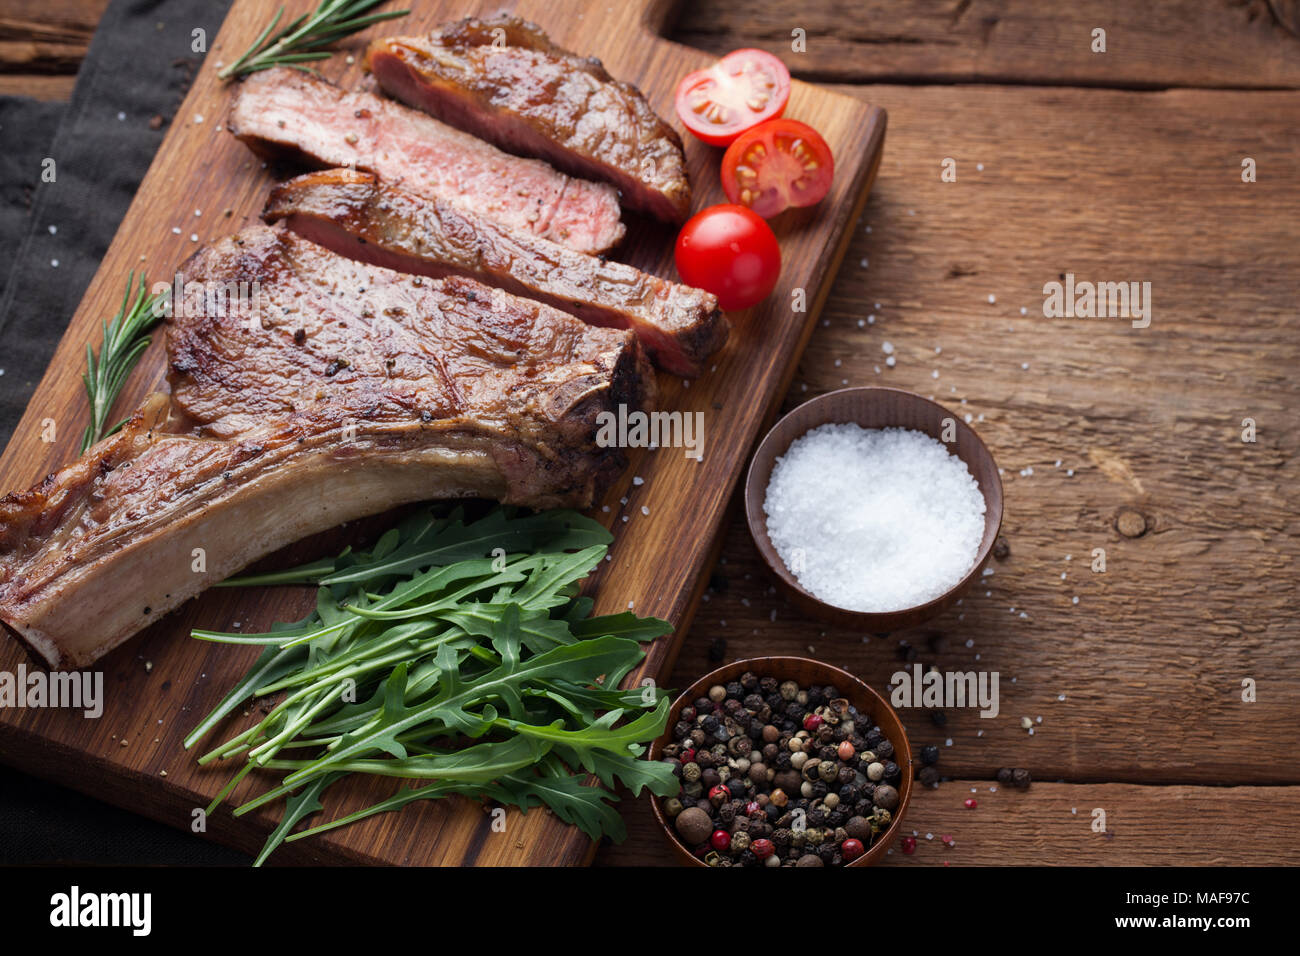 Grilled cowboy beef steak, herbs and spices on a rustic wooden background. Top view with copy space for your text. Stock Photo